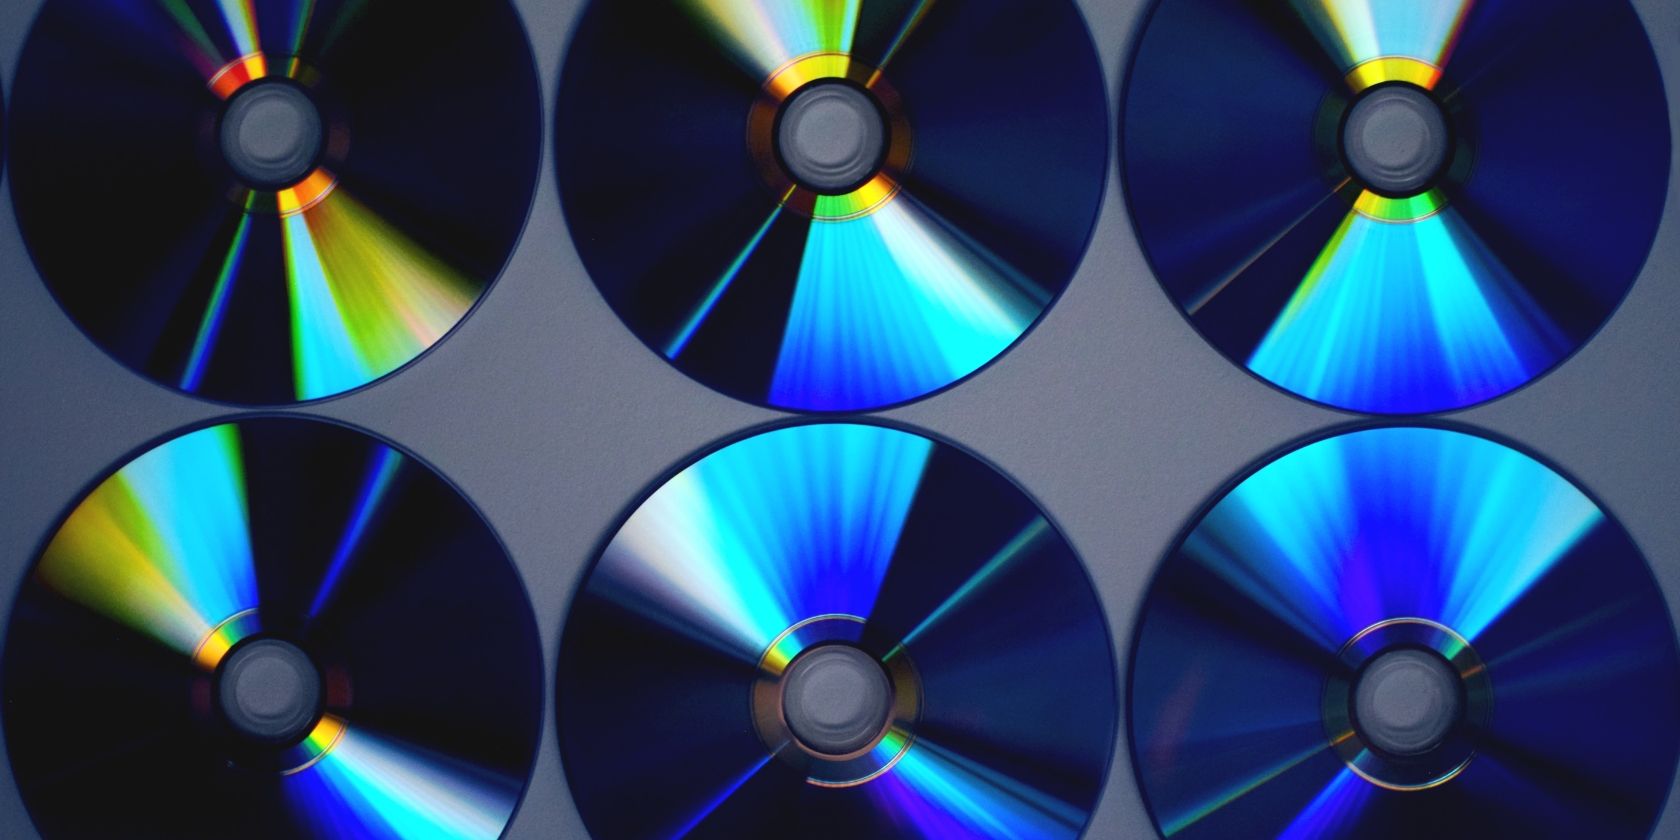 Six blank CD and DVD disks arranged in two rows